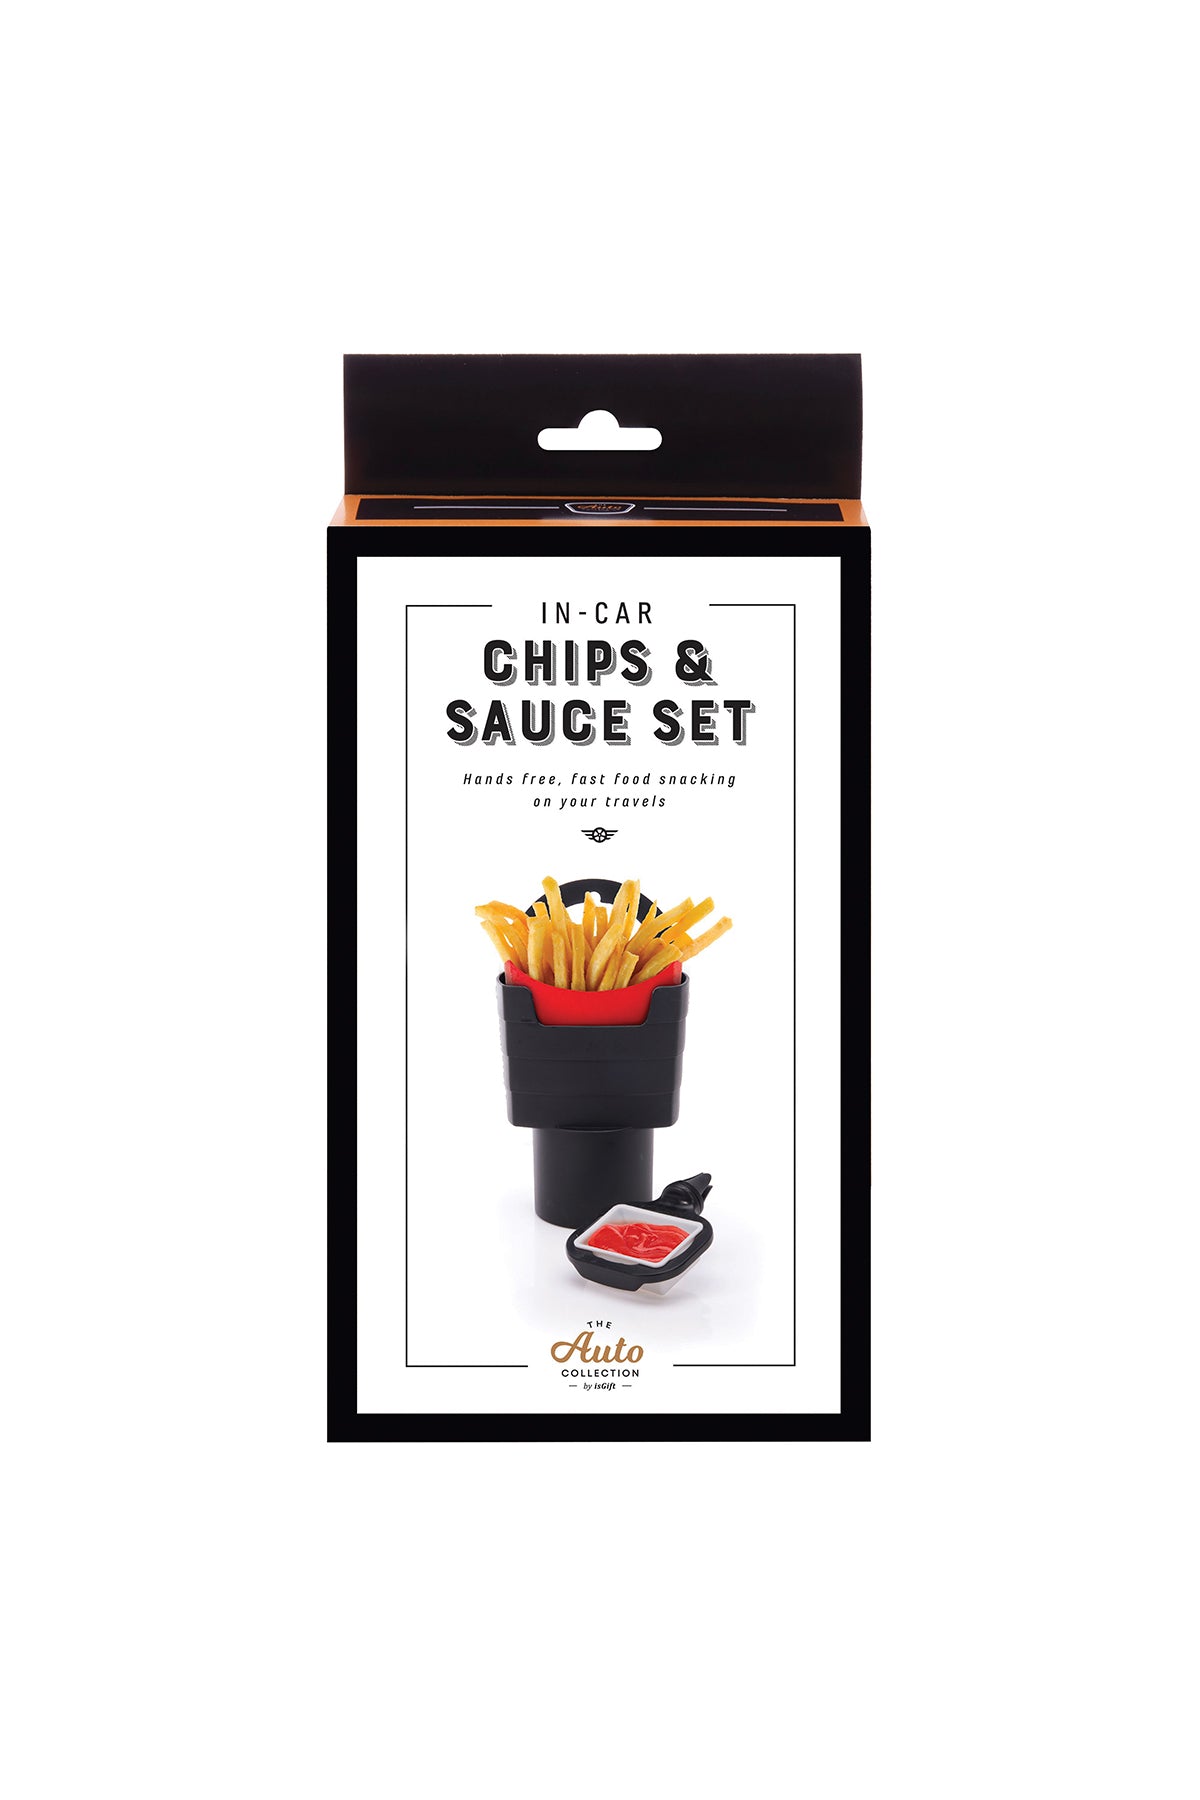 In-­Car Chips and Sauce Set